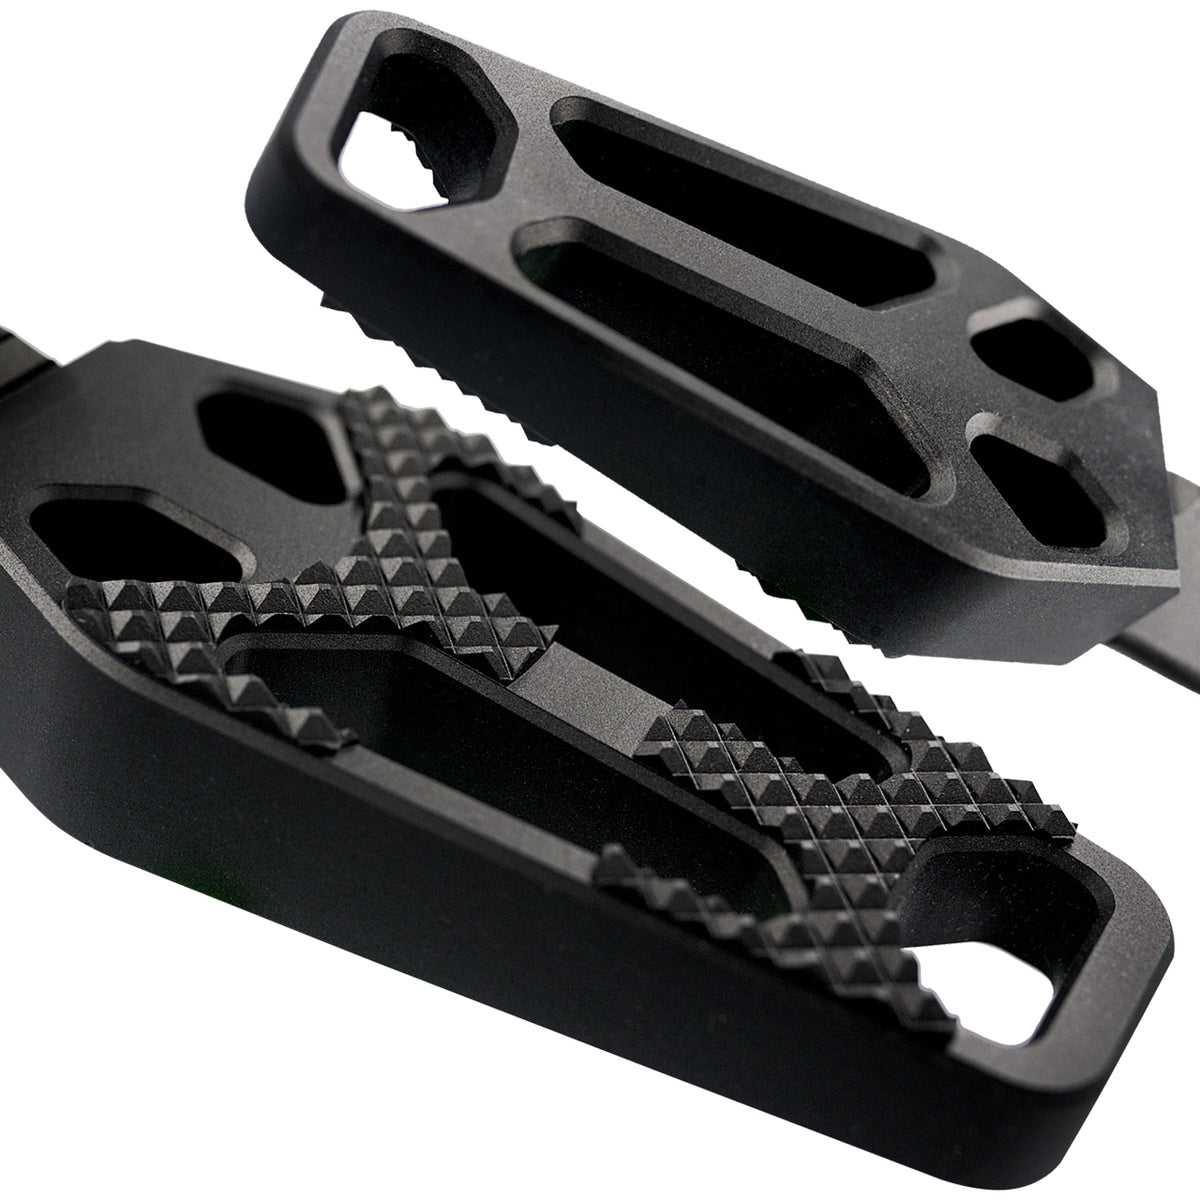 Crook Series Driver Foot Pegs for Harley Davidson M8 Softail